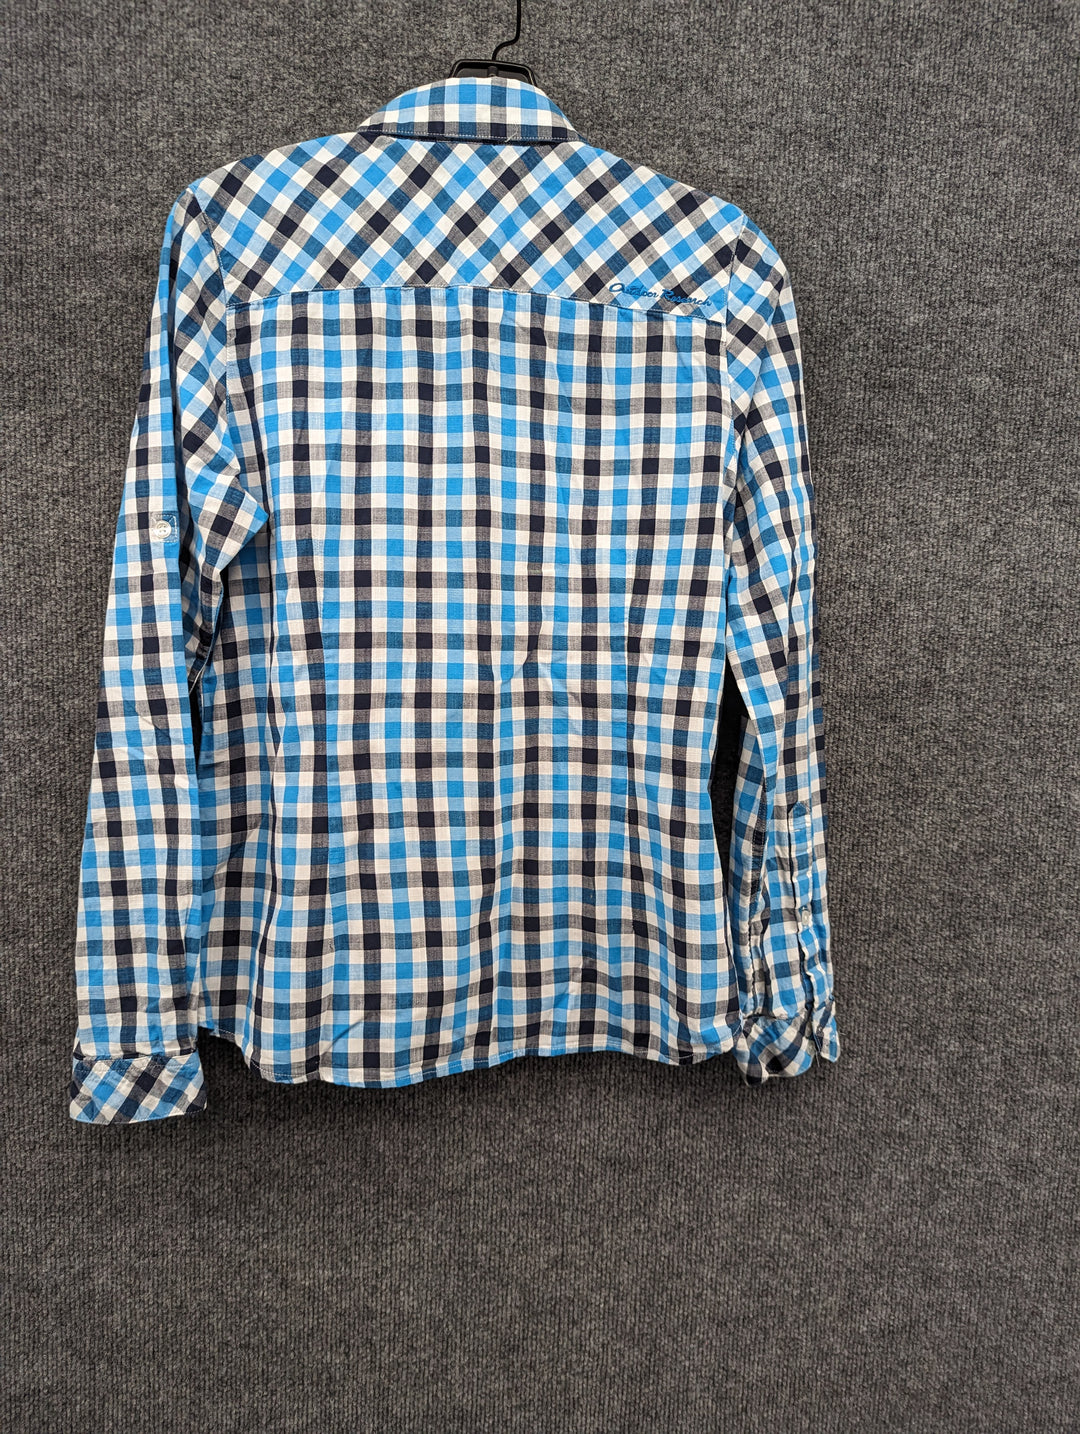 Outdoor Research Size W Medium Women's L/S Button Up